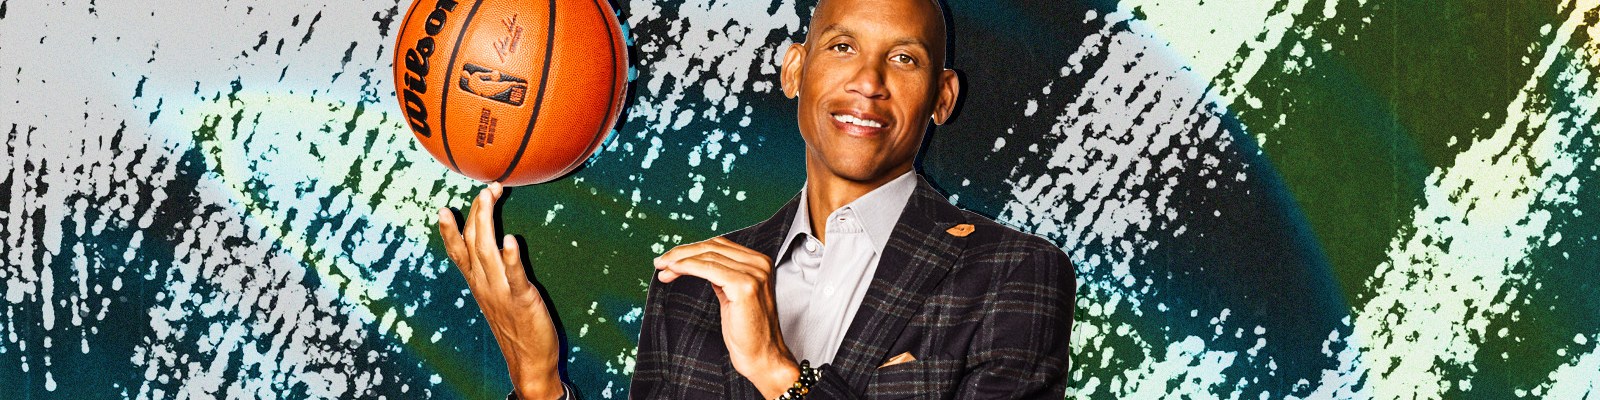 Reggie Miller Talks Playoffs, Paying It Forward, And Calling Games With Joy